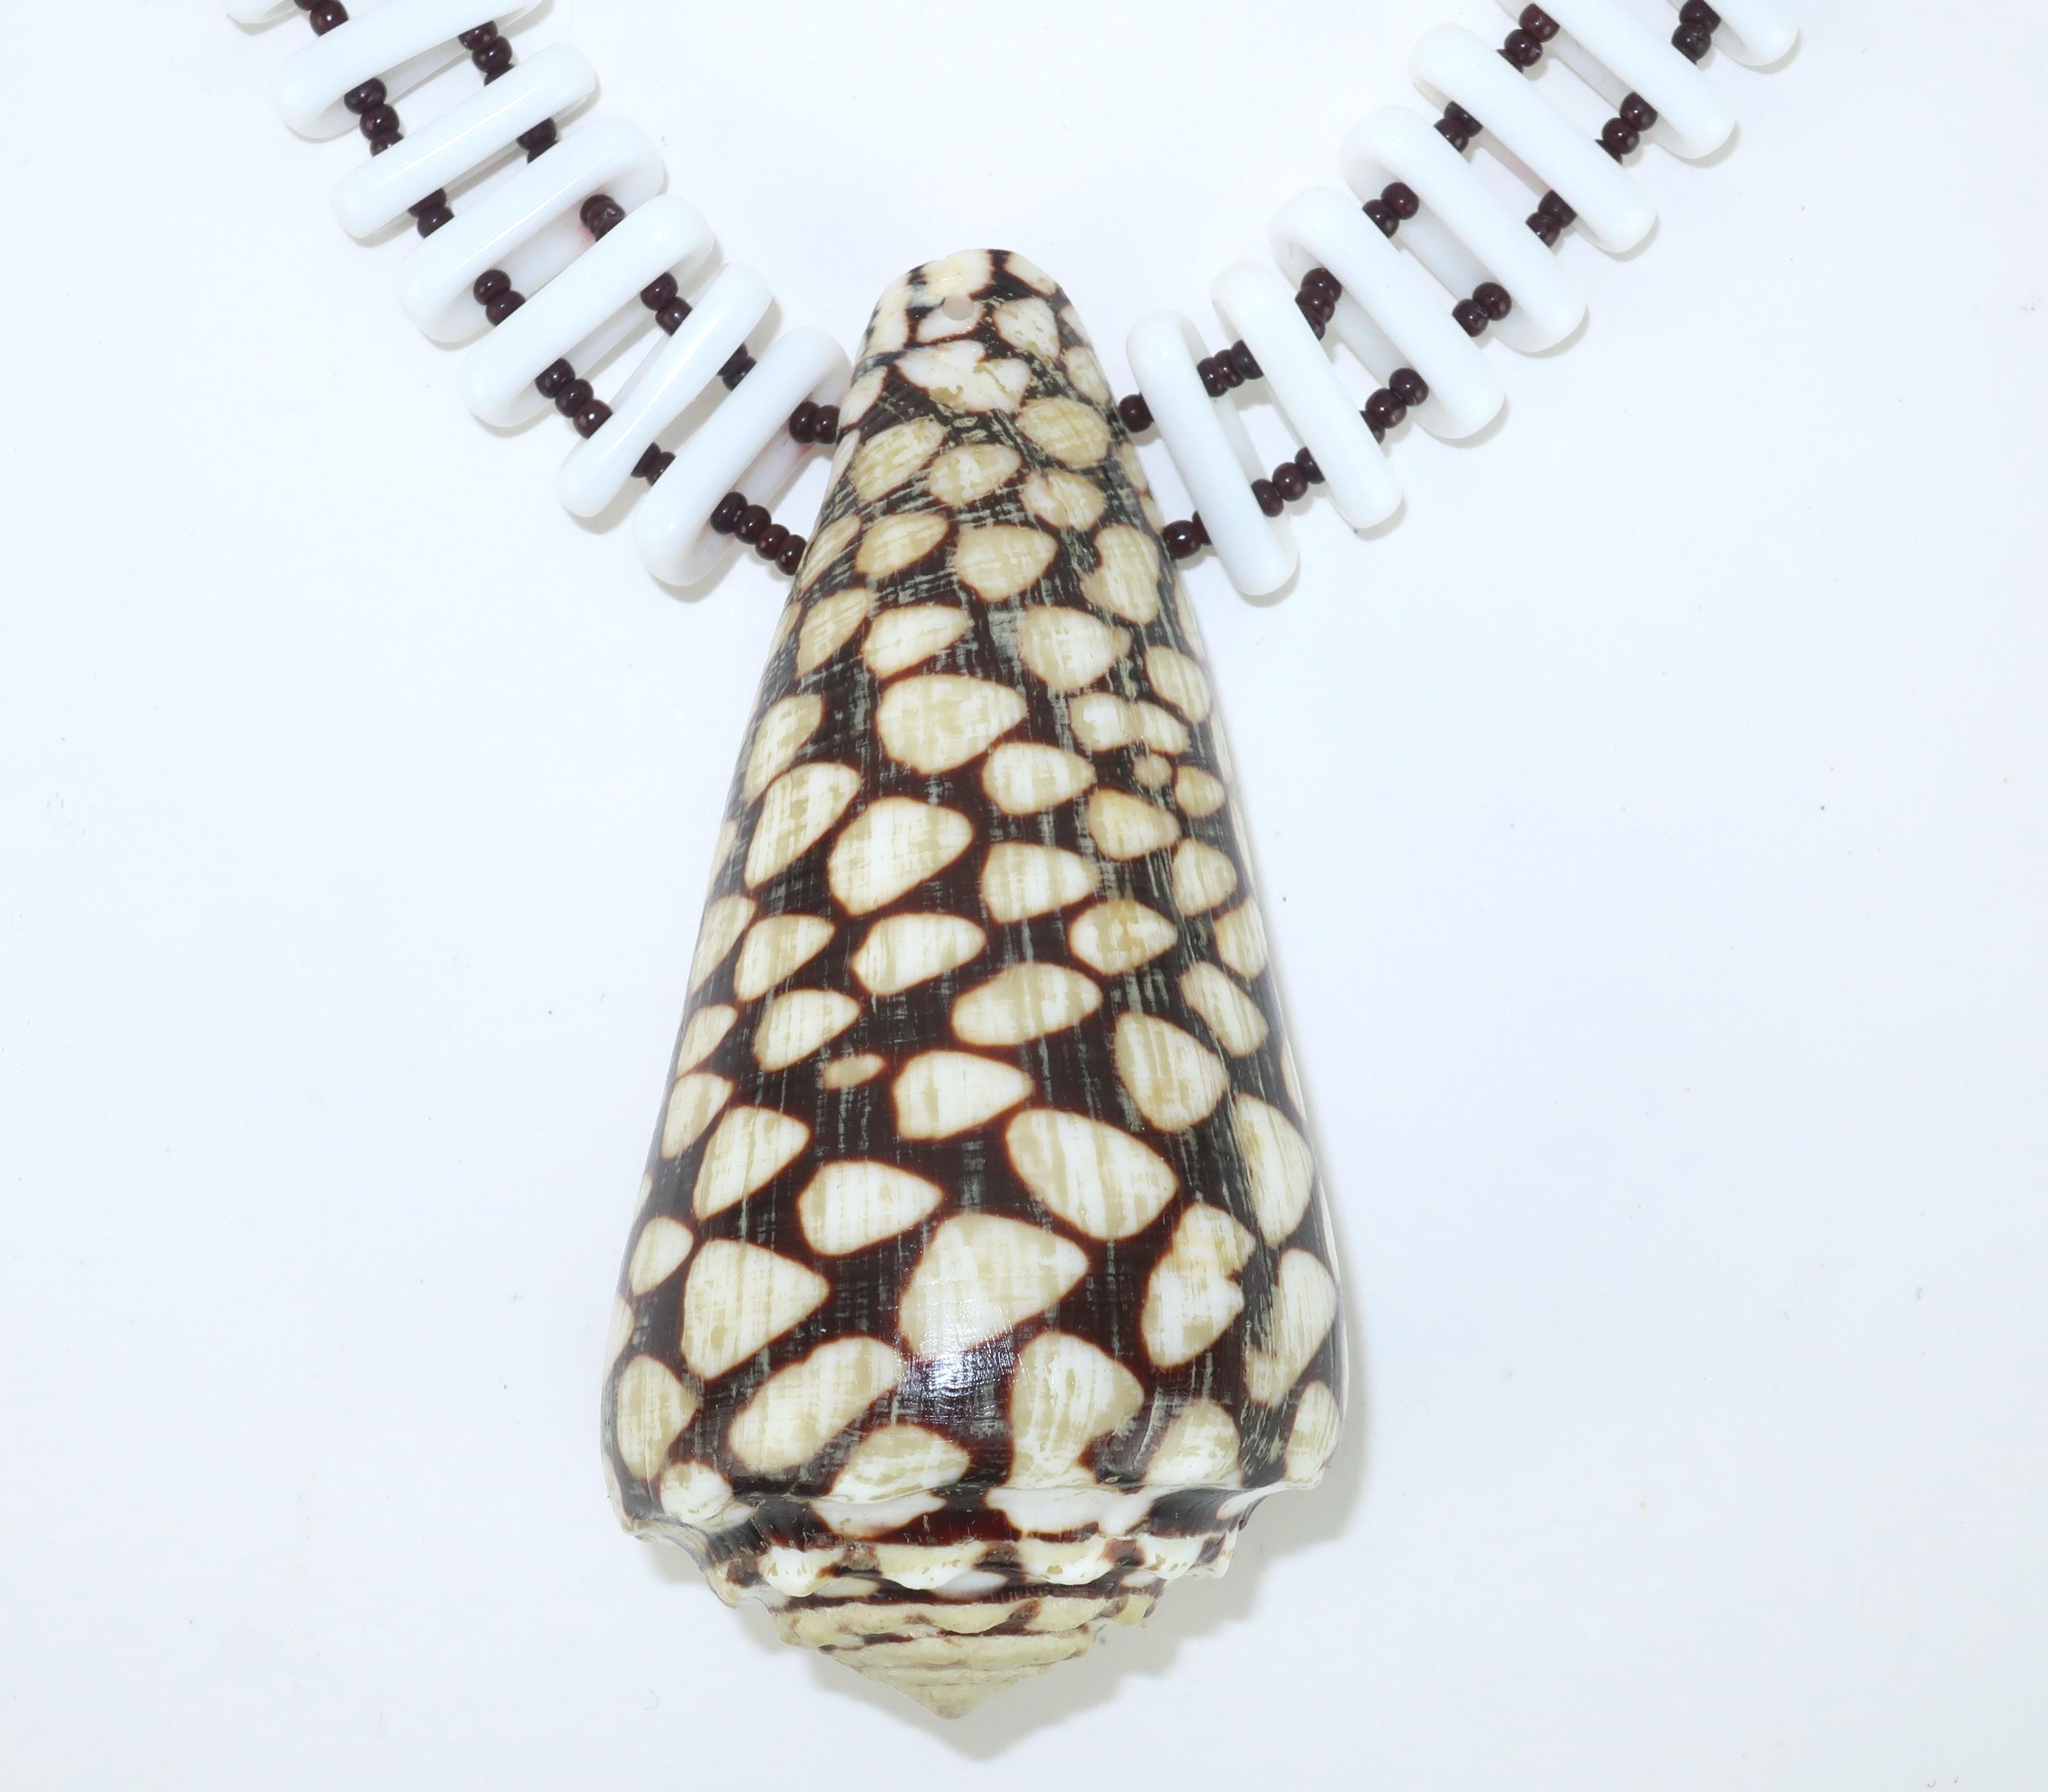 Dramatic in its simplicity, this mid century Miriam Haskell necklace combines a spotted cone shell pendant with capsule shaped white glass beads spaced with smaller dark brown (almost black) beads.  The organic design makes a statement and pairs